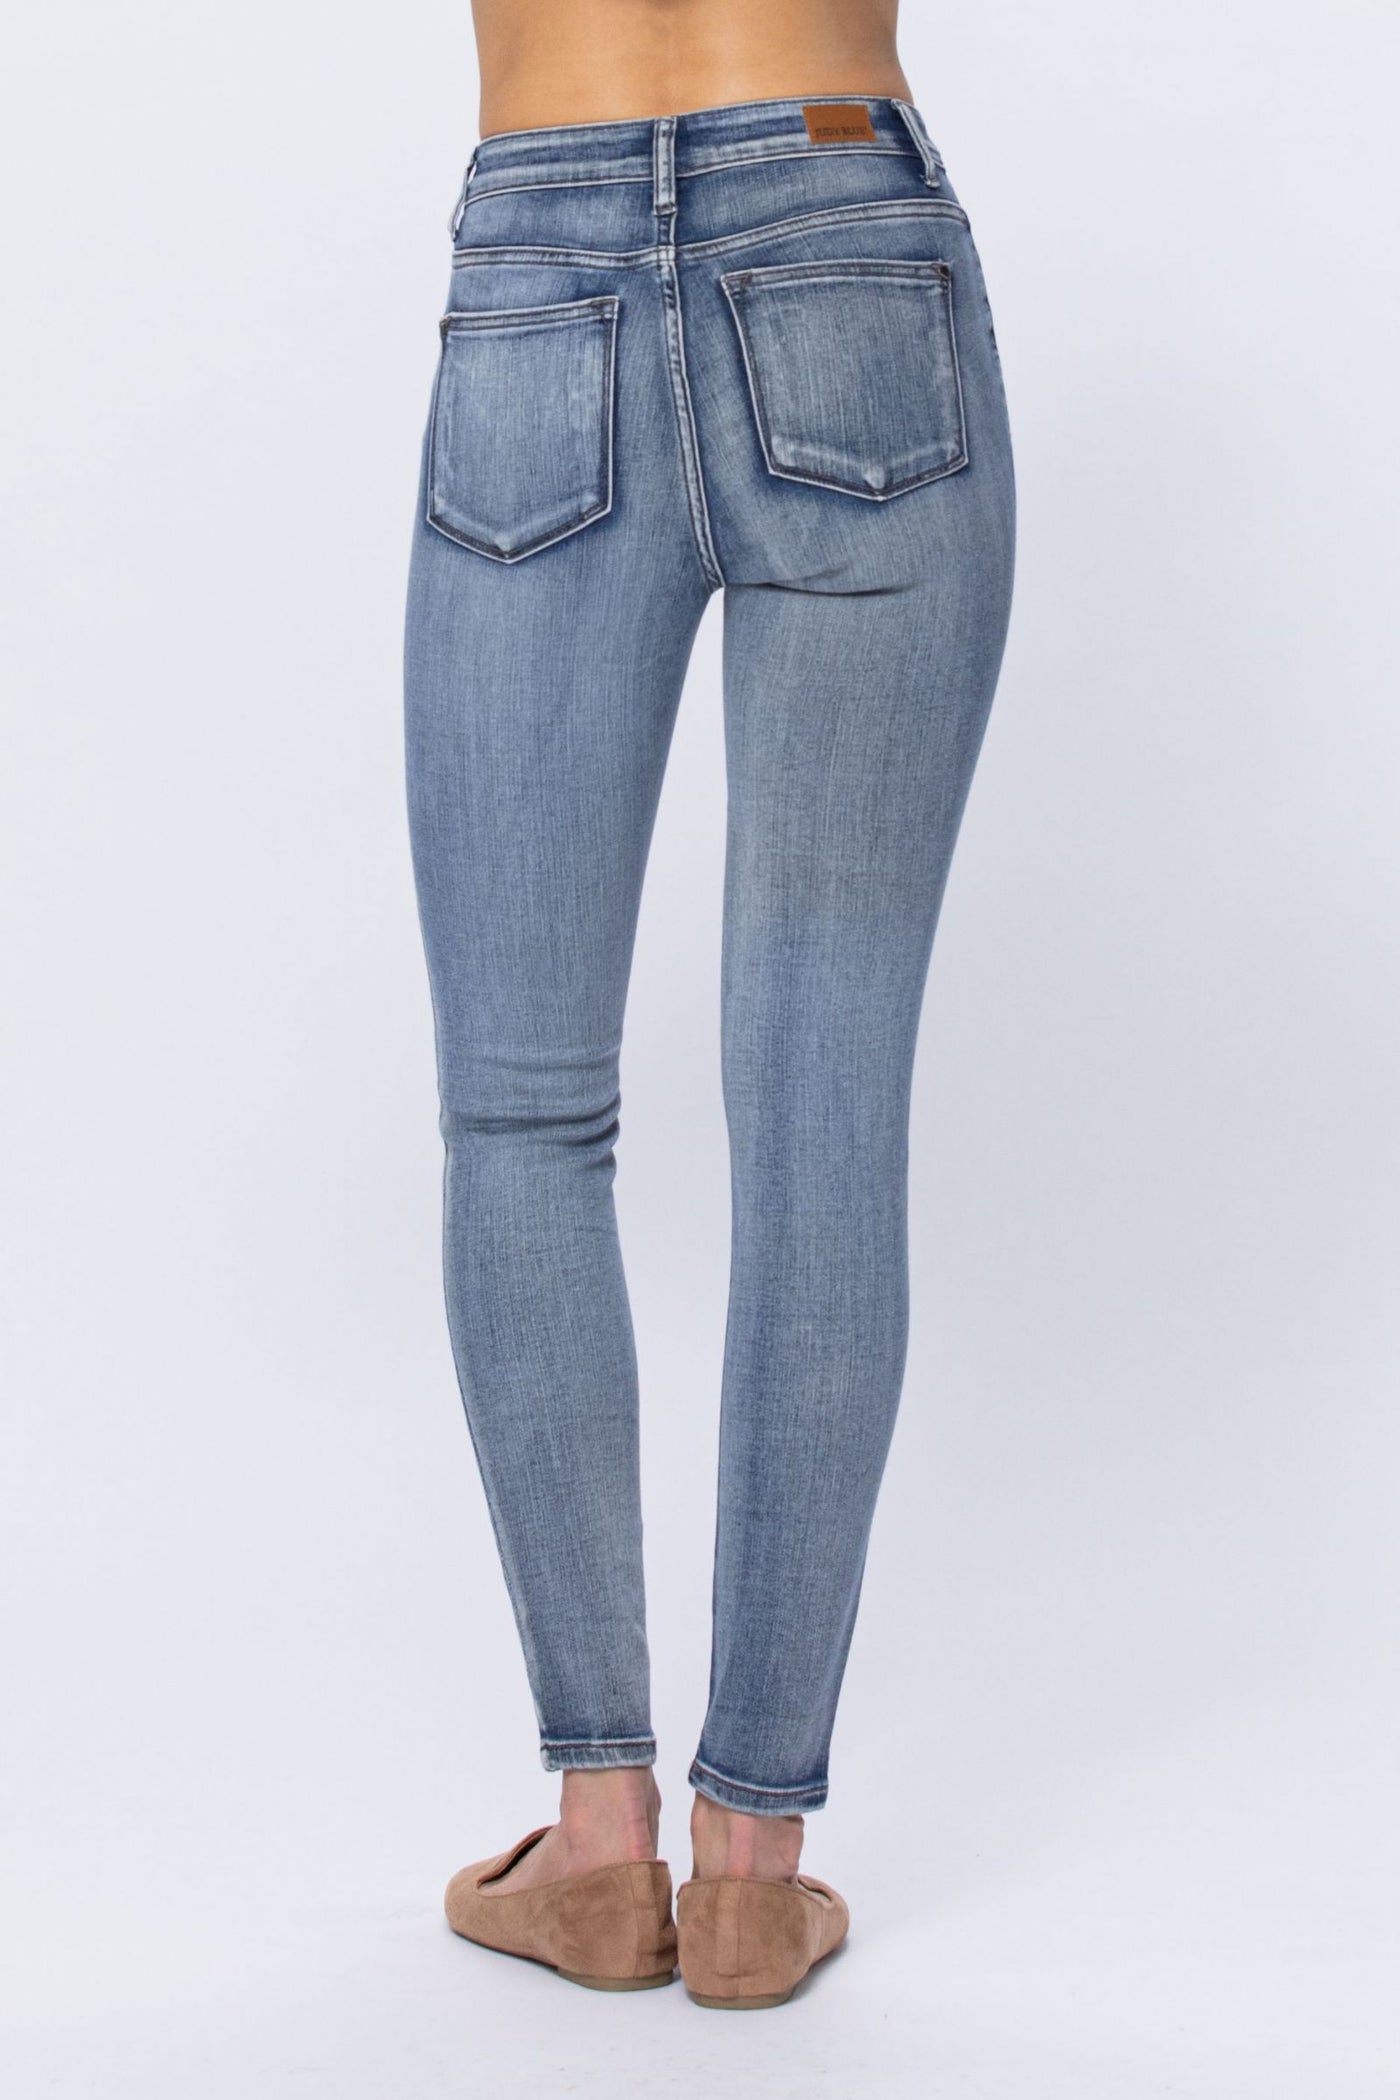 Judy Blue High Rise Skinny - Corinne Boutique Family Owned and Operated USA